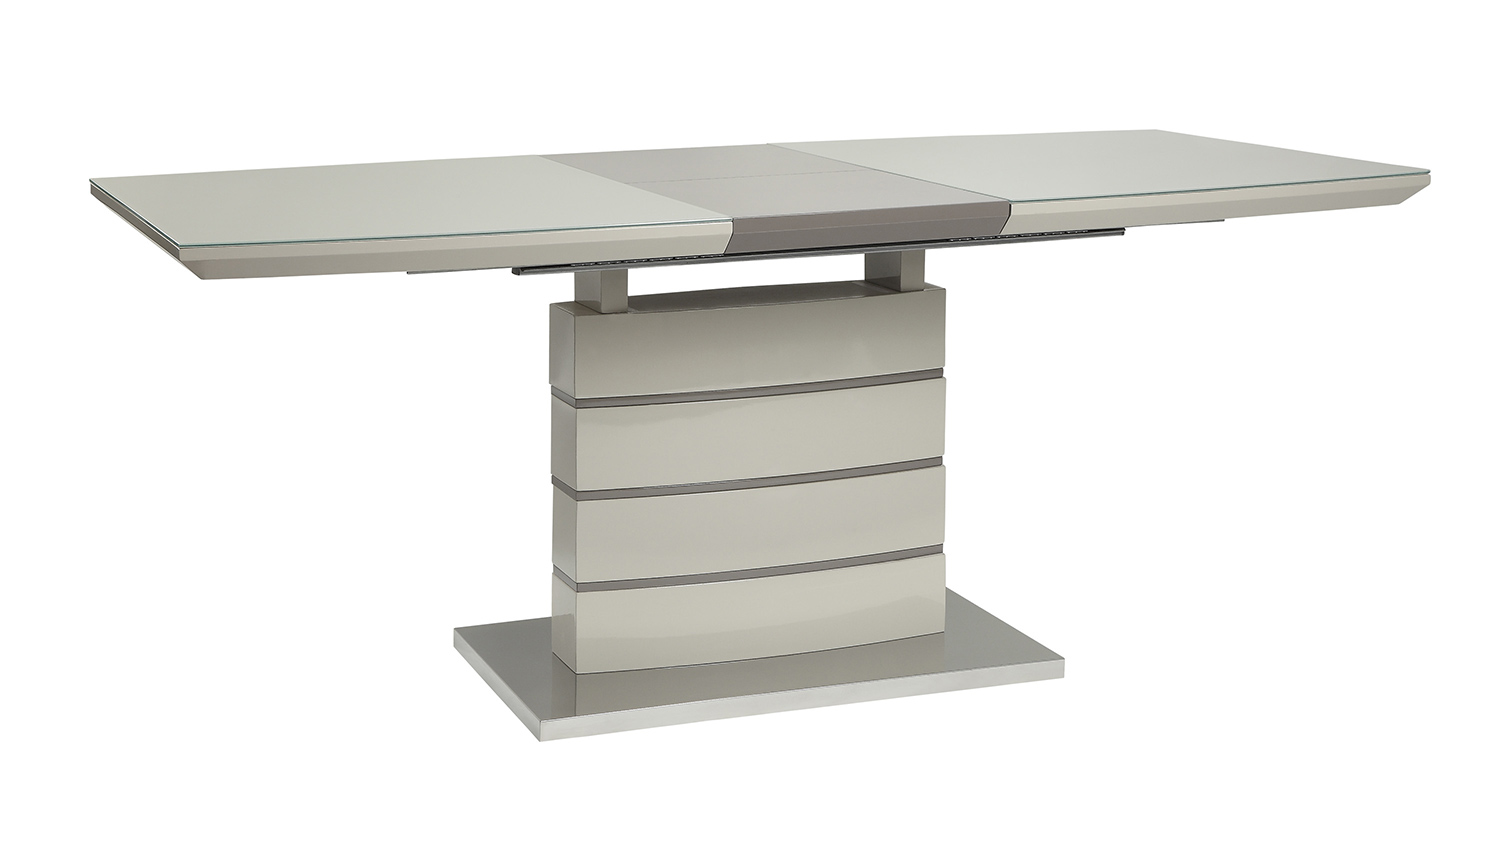 Homelegance Glissand Dining Table - Glossy - Grey-Taupe Bi-Cast Vinyl